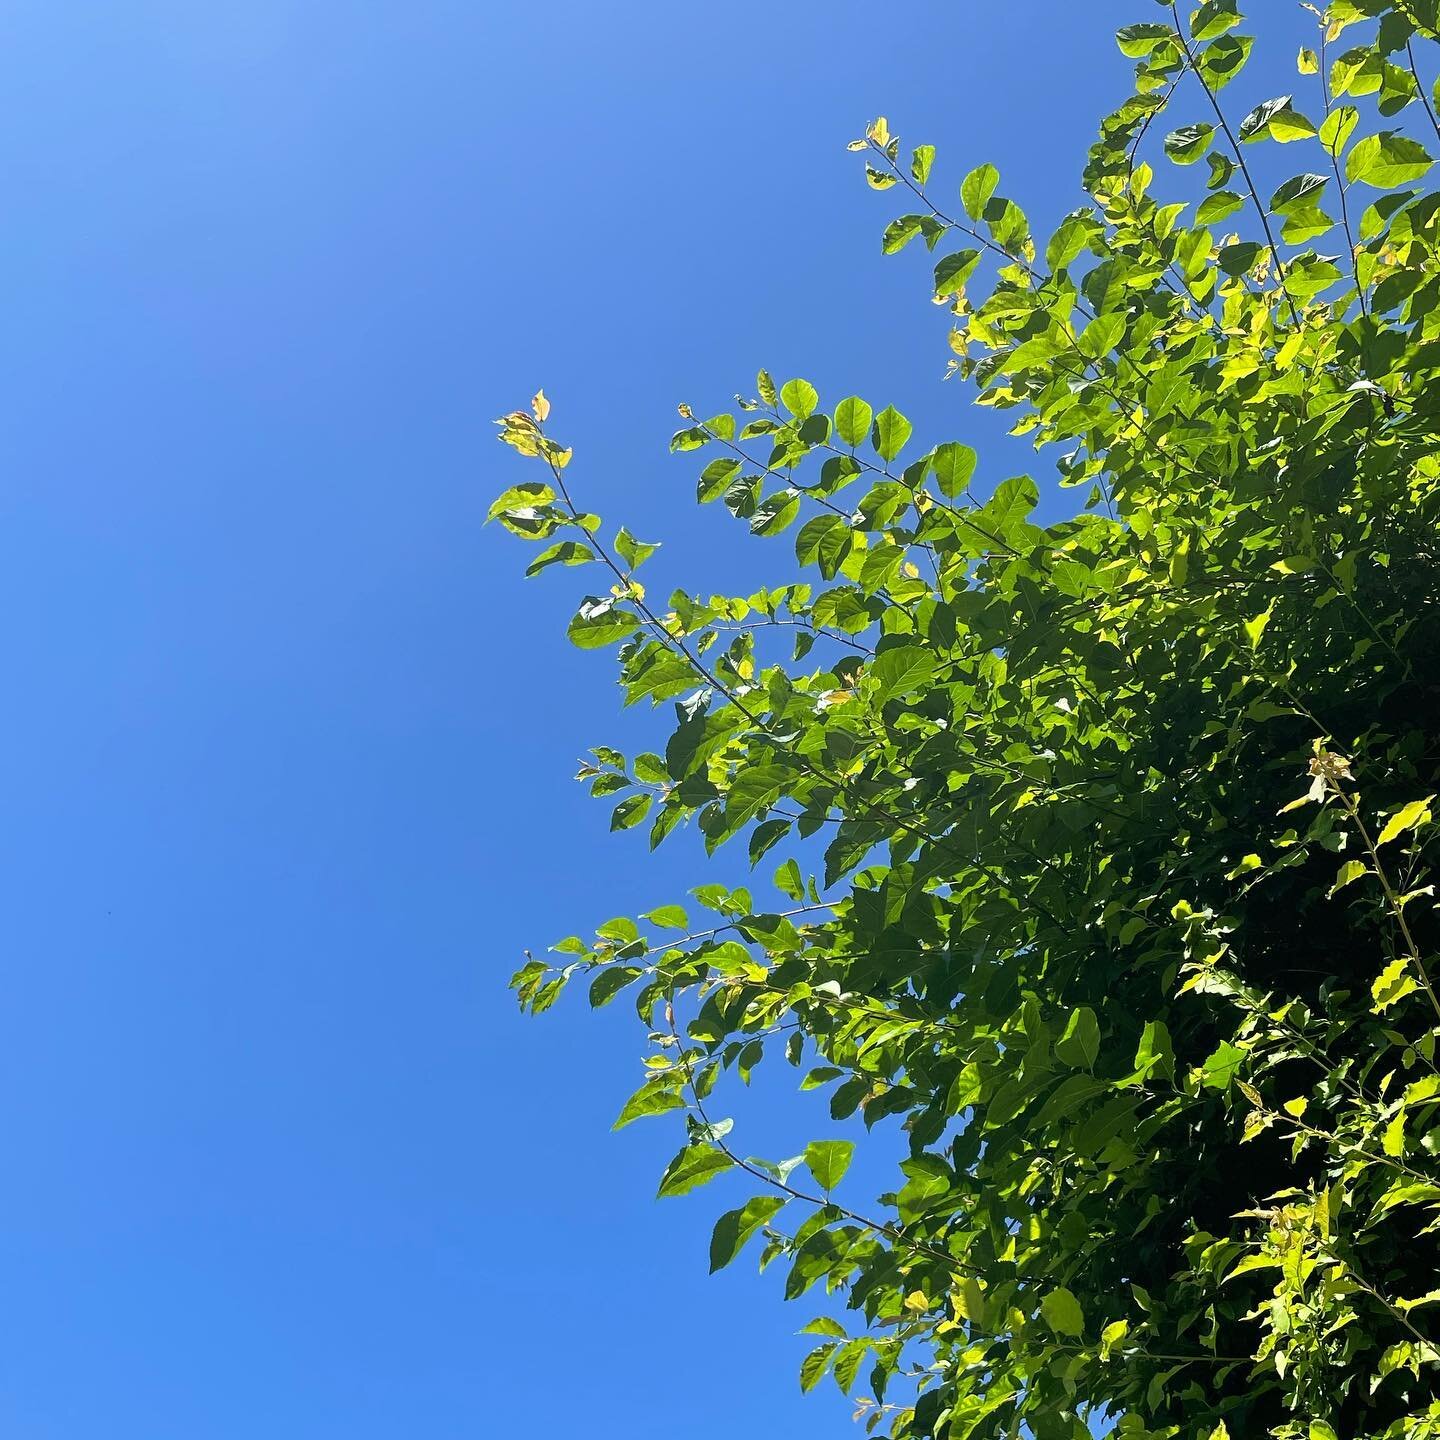 Don&rsquo;t you just love the colours of summer? Deep blue sky through the green leaves. 
I was stretching out after my rebounding class with @reboundinguk looking up at this and couldn&rsquo;t resist taking a quick pic (Sorry Gemma!) before carrying